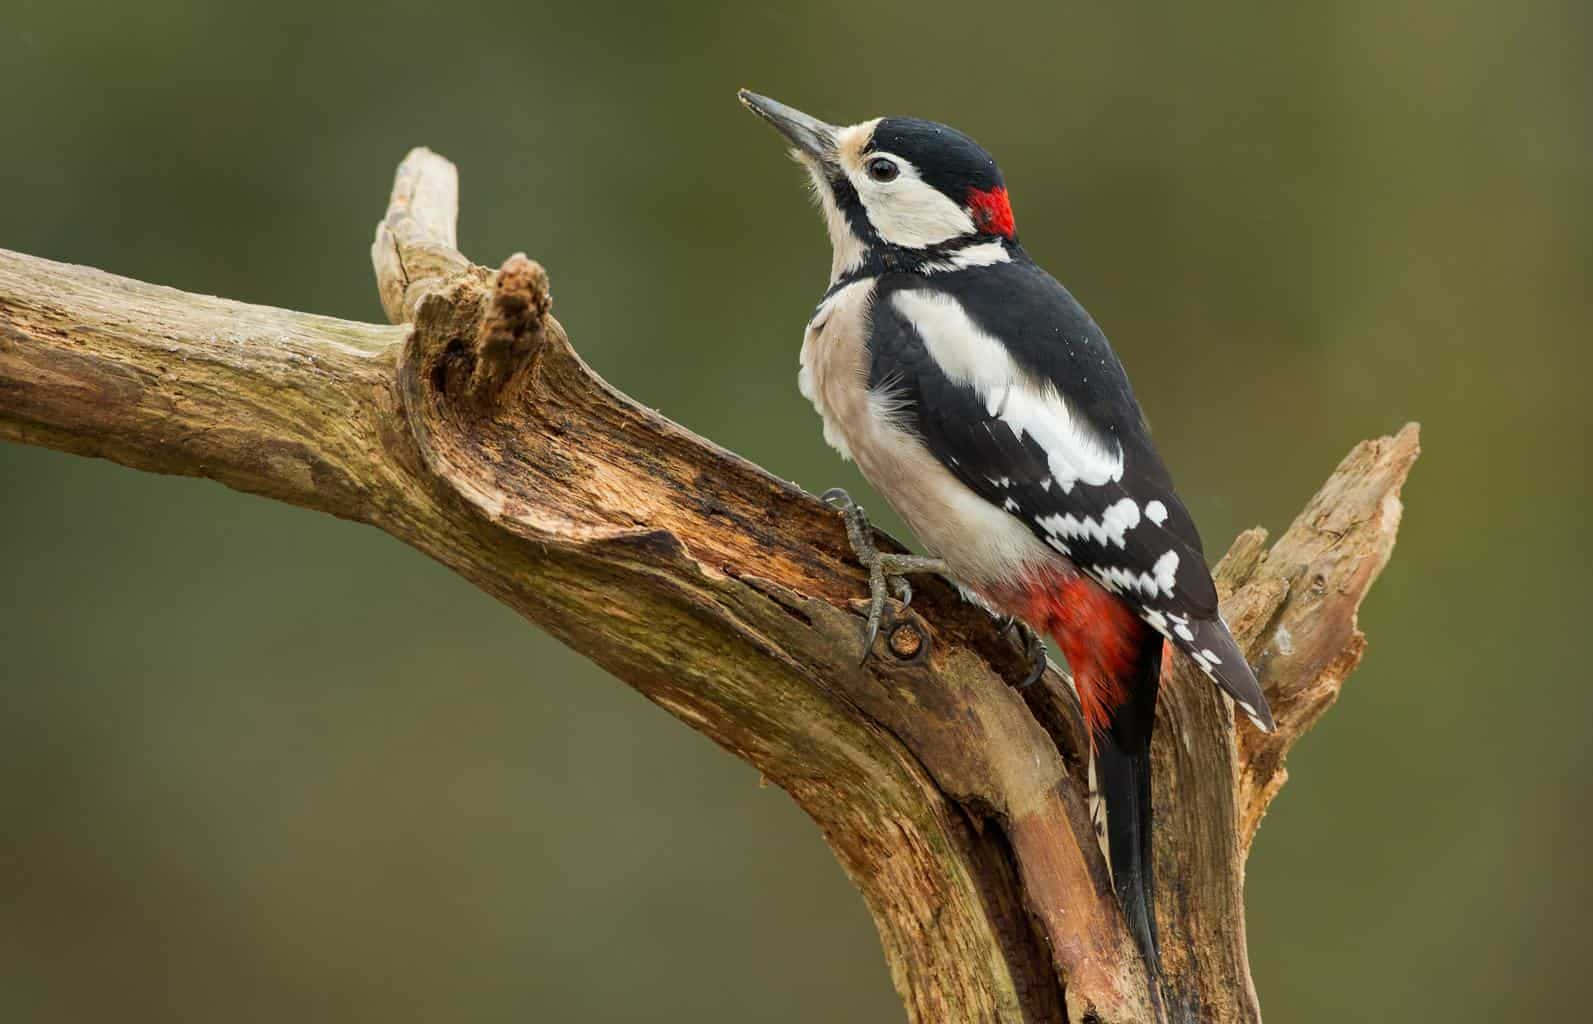 A Woodpecker Diligently Searching For Food